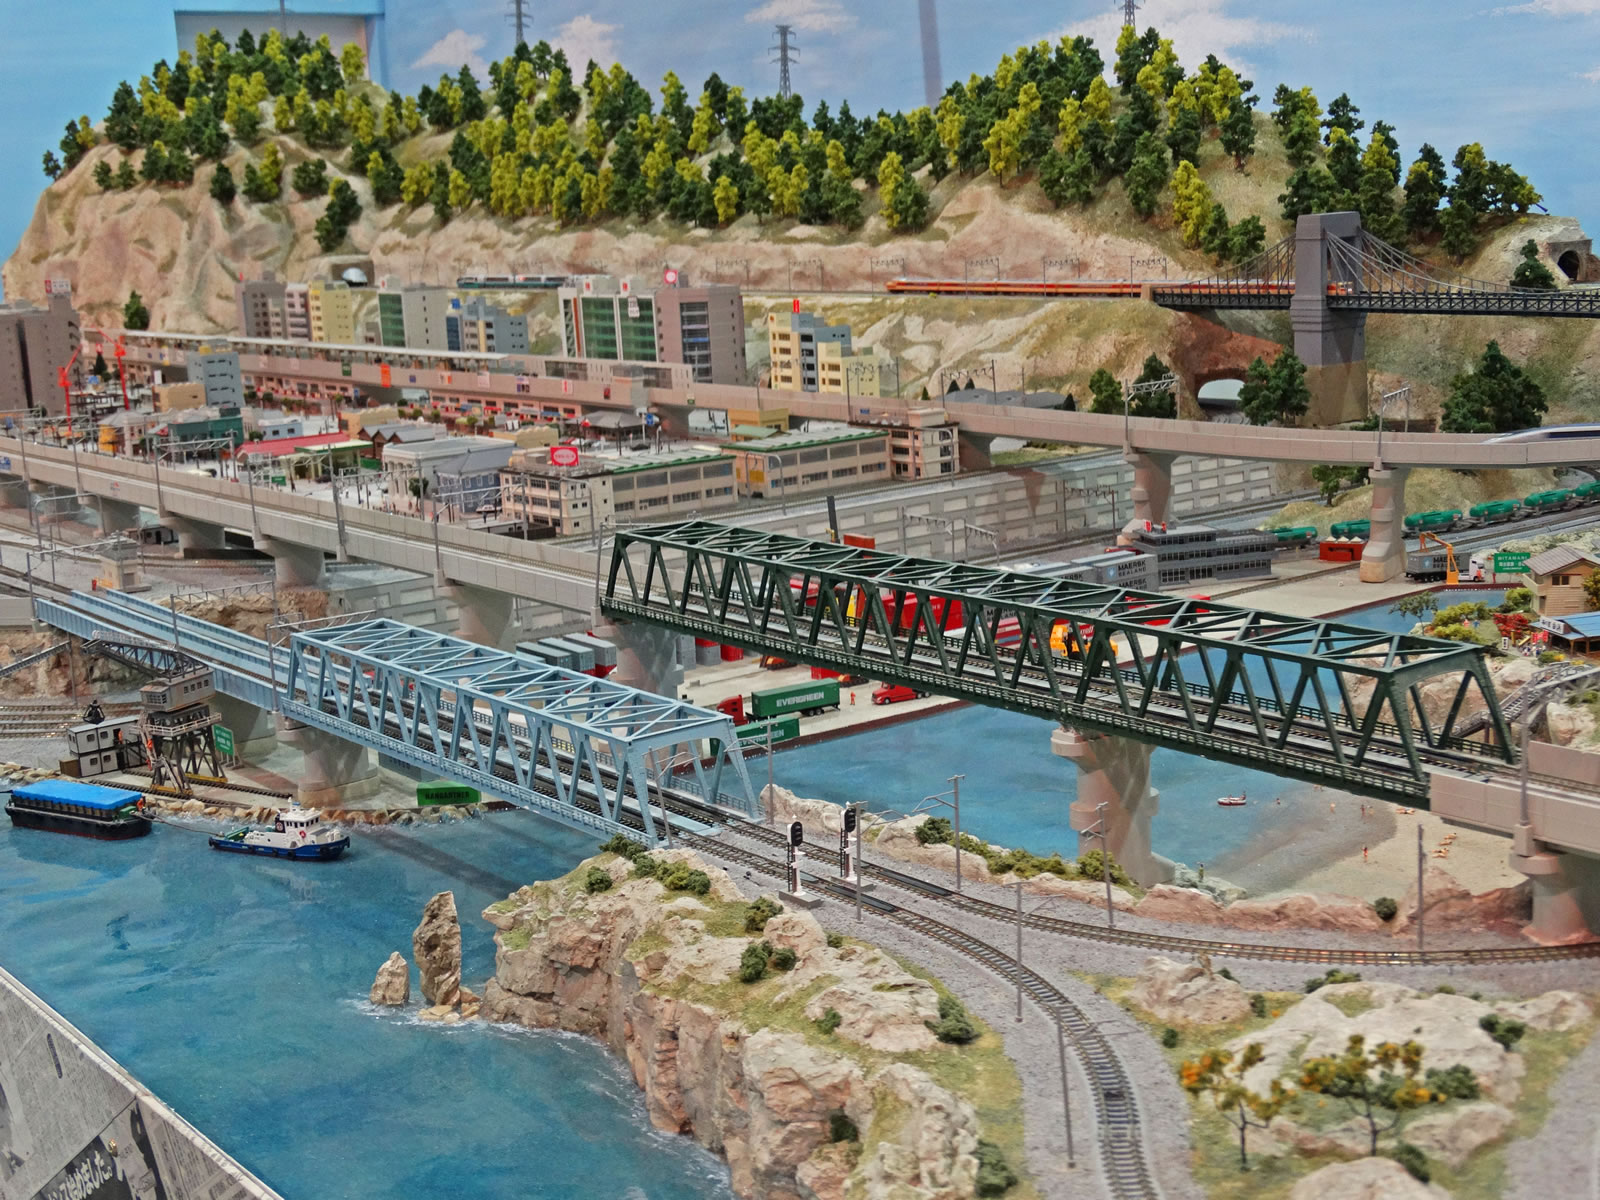 The harbour section of the Japanese layout